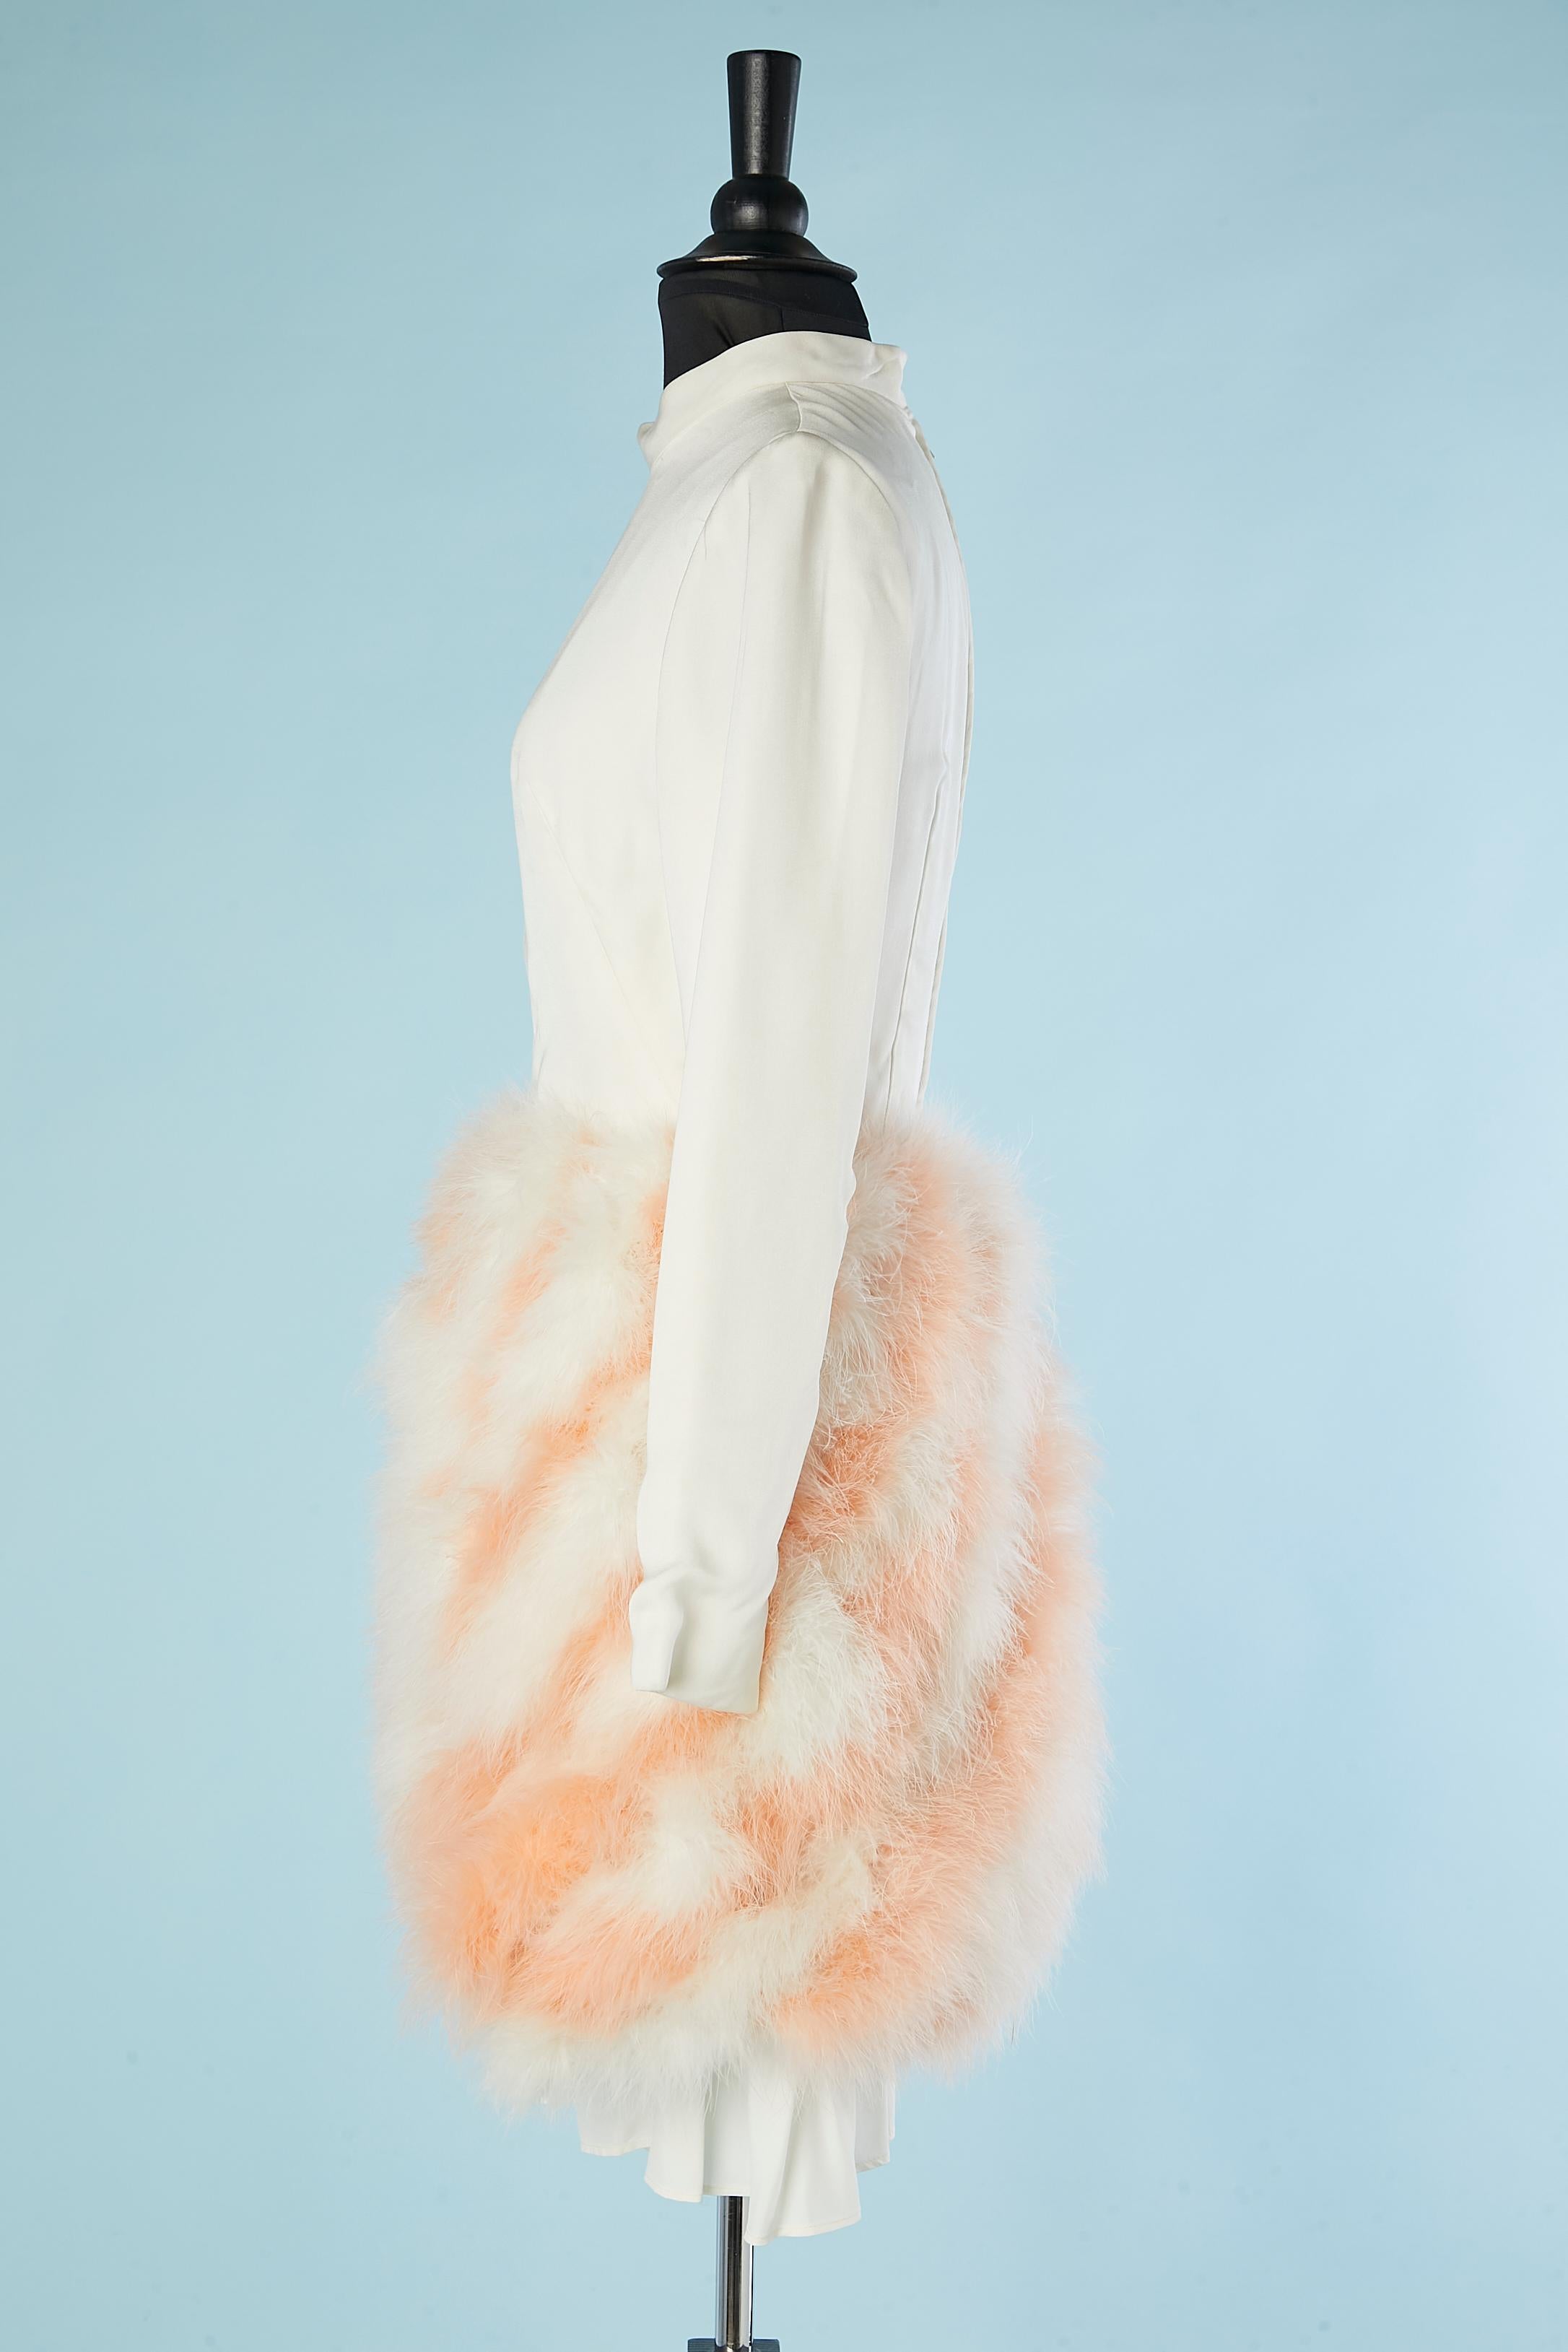 Women's Cocktail dress in off-white rayon and feathers Lord & Taylor 5th Avenue  For Sale